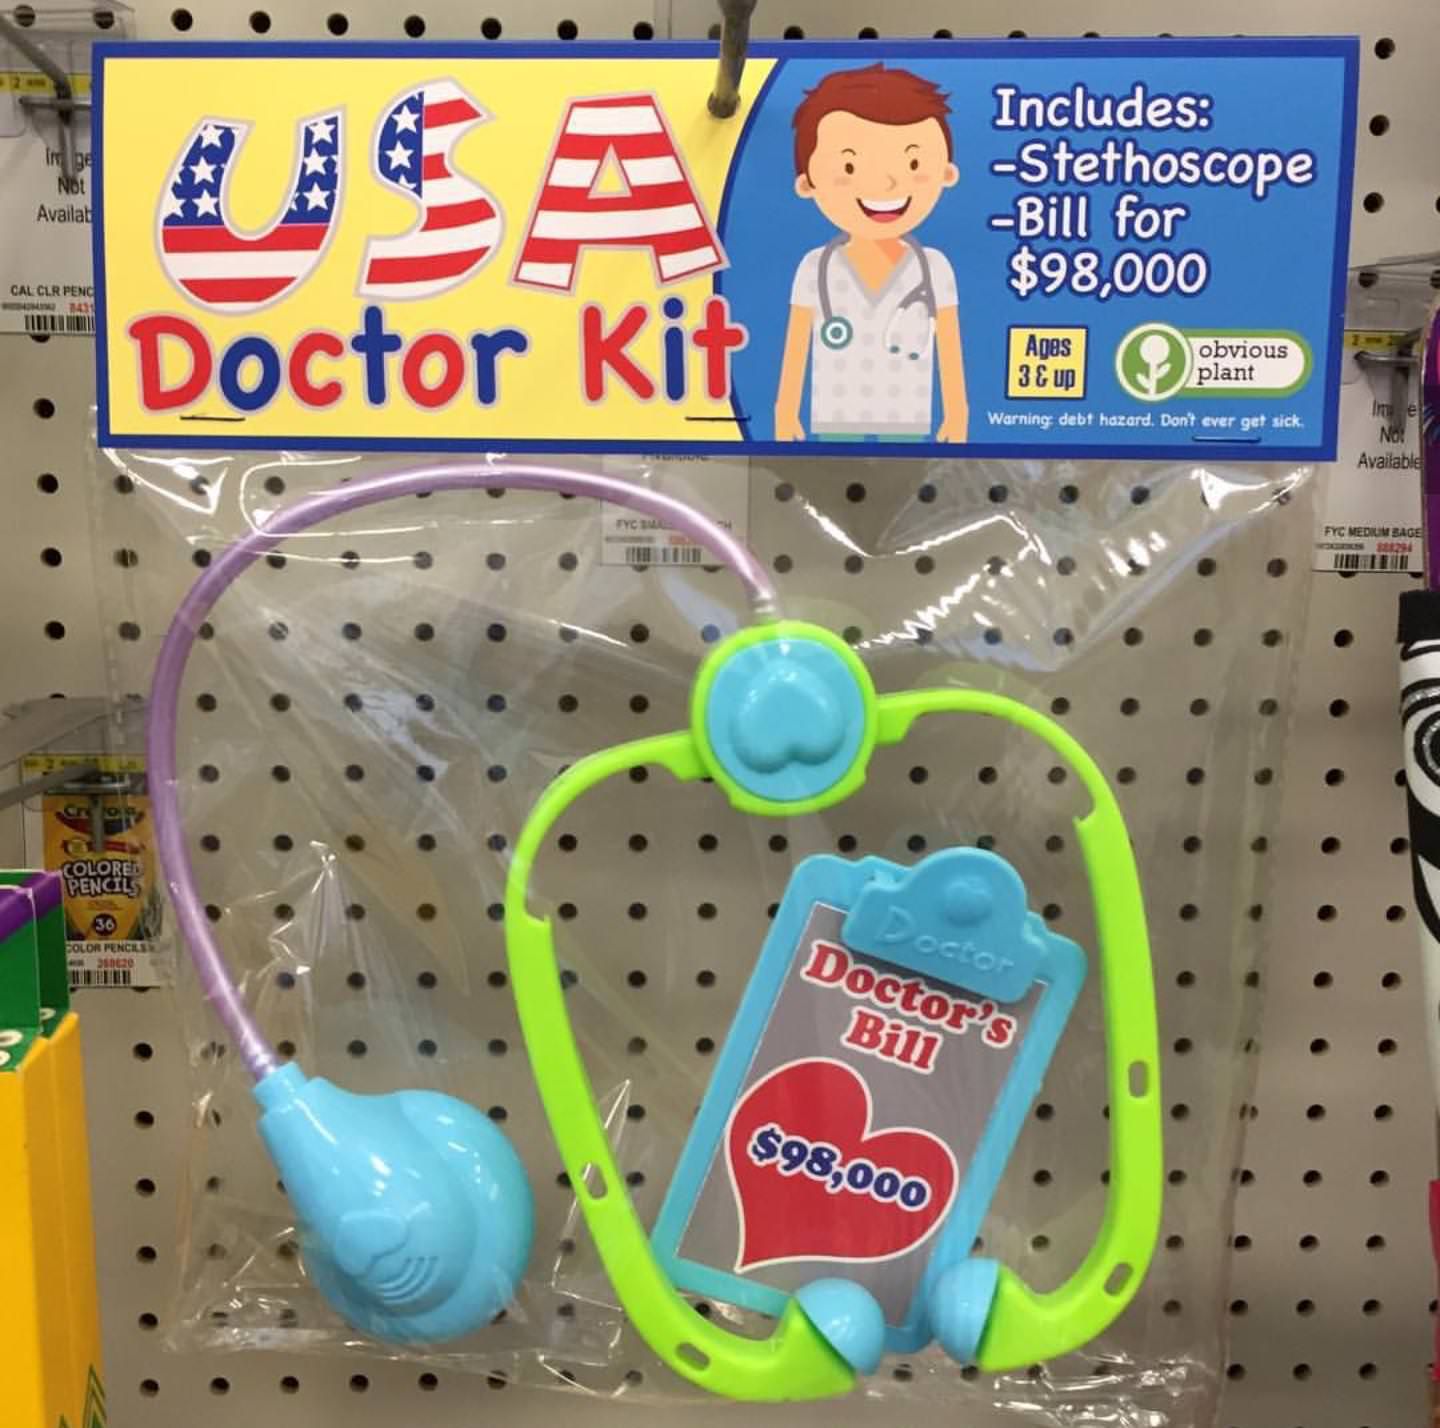 This toy is too real....